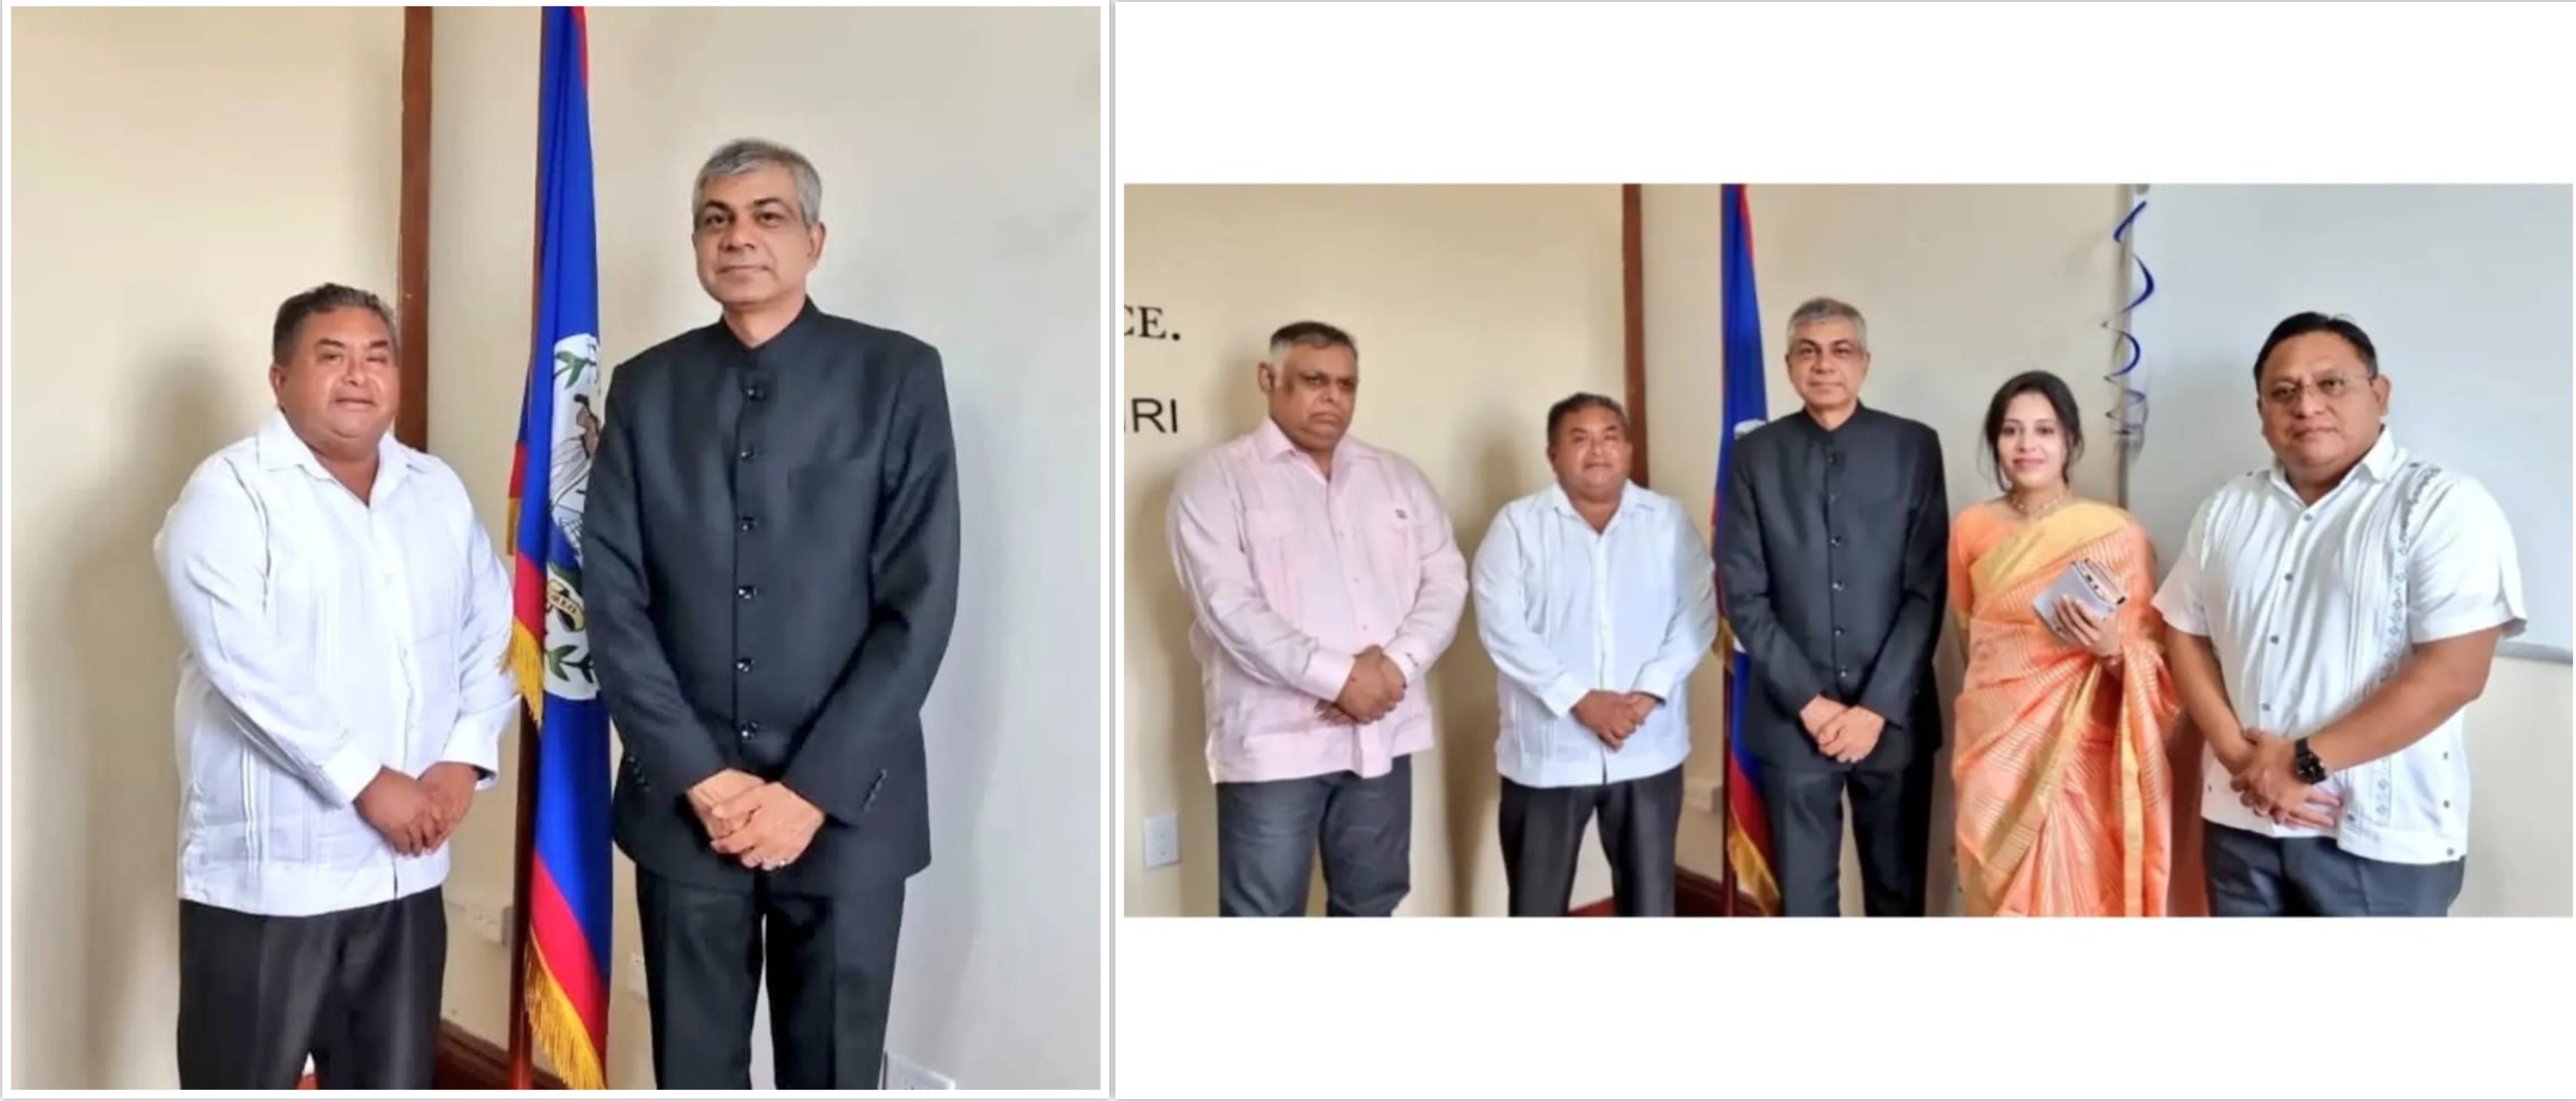  <div style="fcolor: #fff; font-weight: 600; font-size: 1.5em;">
<p style="font-size: 13.8px;">High Commissioner of India to Belize Dr. Pankaj Sharma met with the Hon'ble Minister of Labor, Local Government and Rural Development of Belize, H.E. Mr. Oscar Requena and  CEO Mr. Valentino Shaal. 
<br /><span style="text-align: center;">19 September 2022</span></p>
</div>